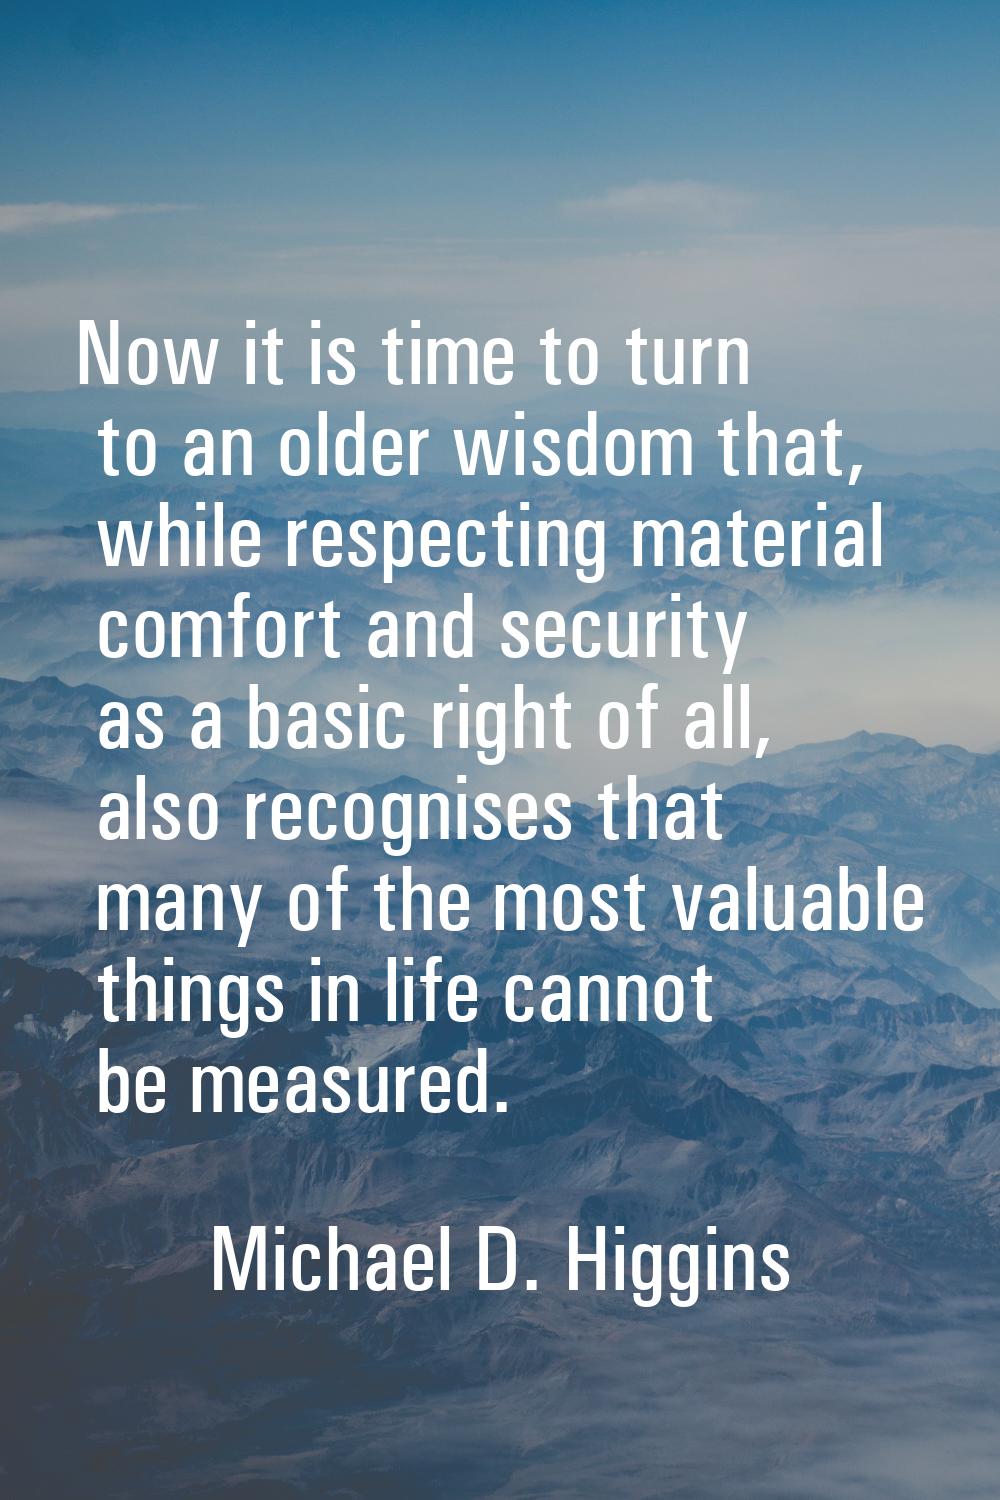 Now it is time to turn to an older wisdom that, while respecting material comfort and security as a